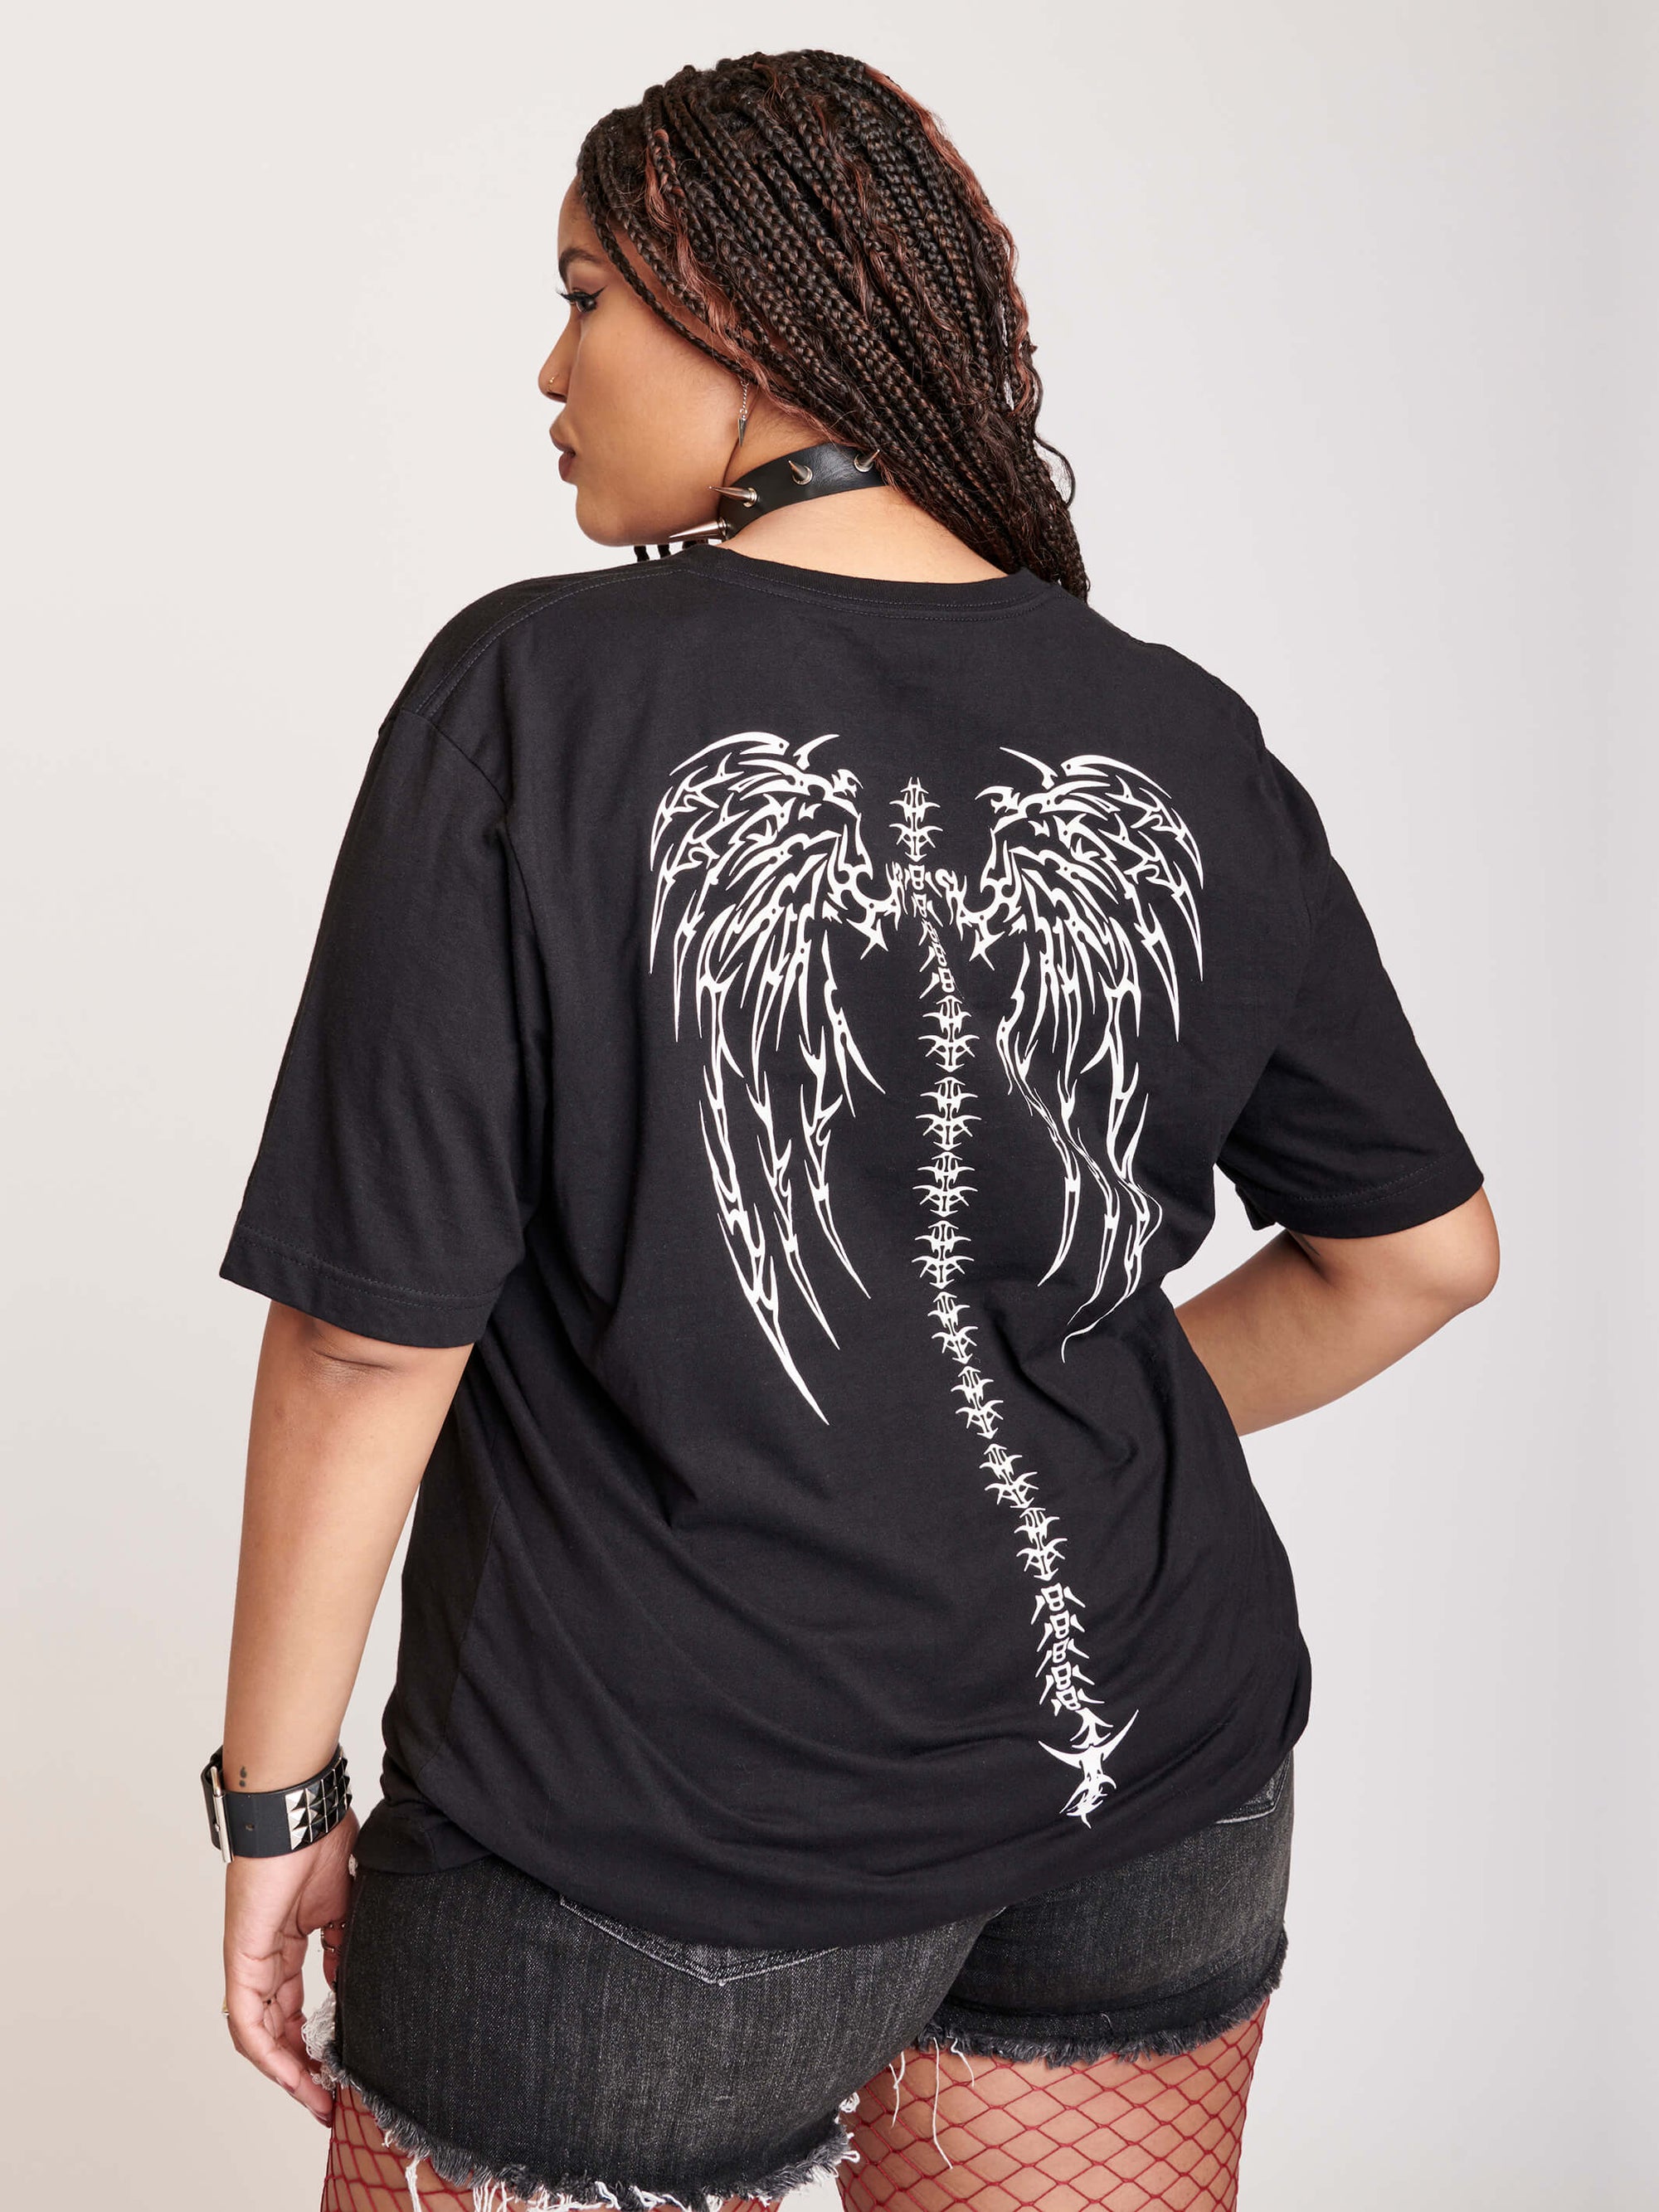 Black T-shirt with back angel wing and spine detail